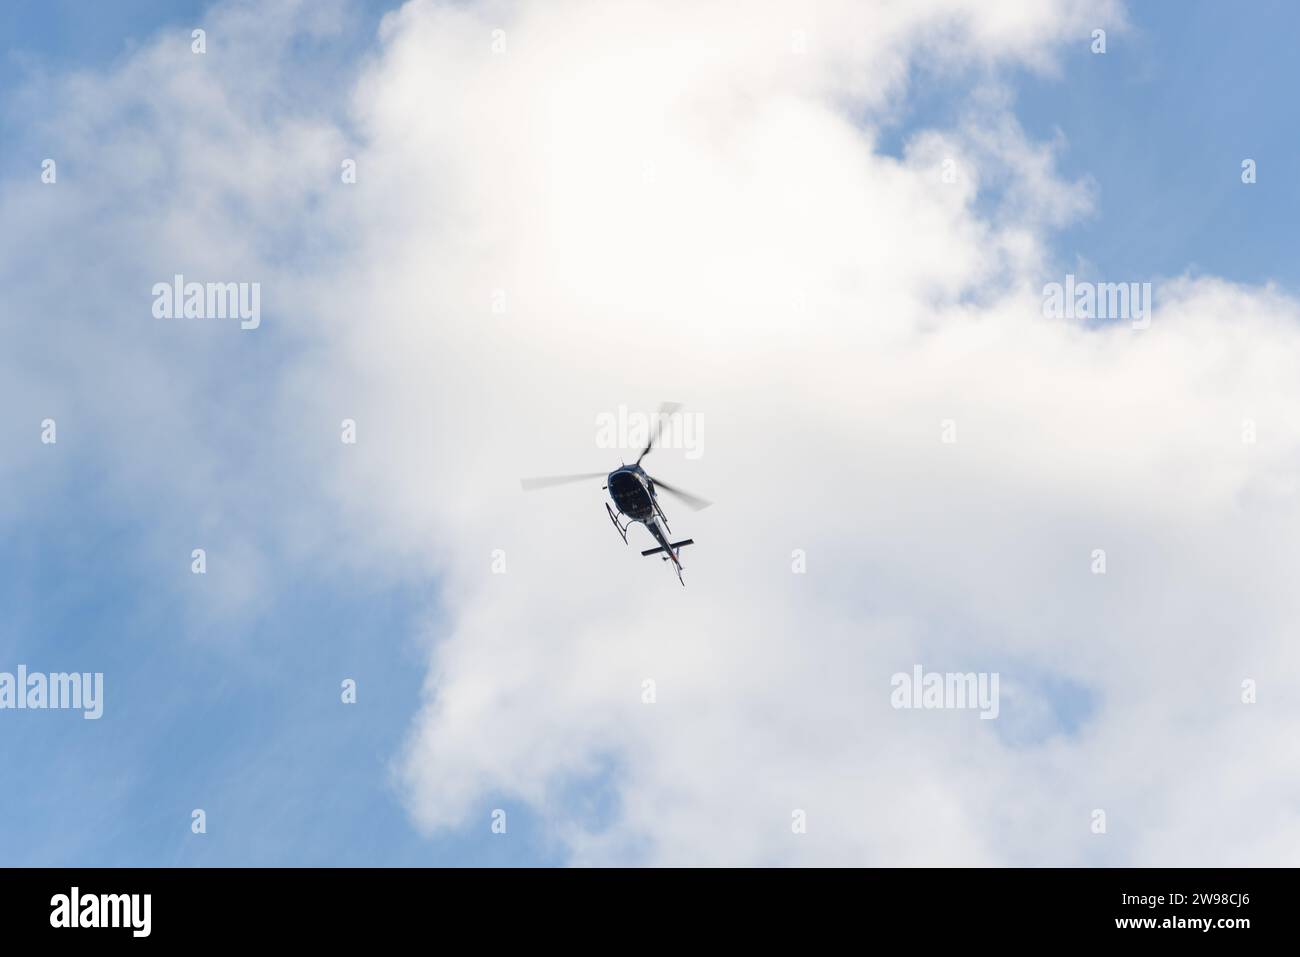 Salvador, Bahia, Brazil - April 26, 2019: A military police helicopter flying over Jaguaribe beach in the city of Salvador, Bahia. Stock Photo